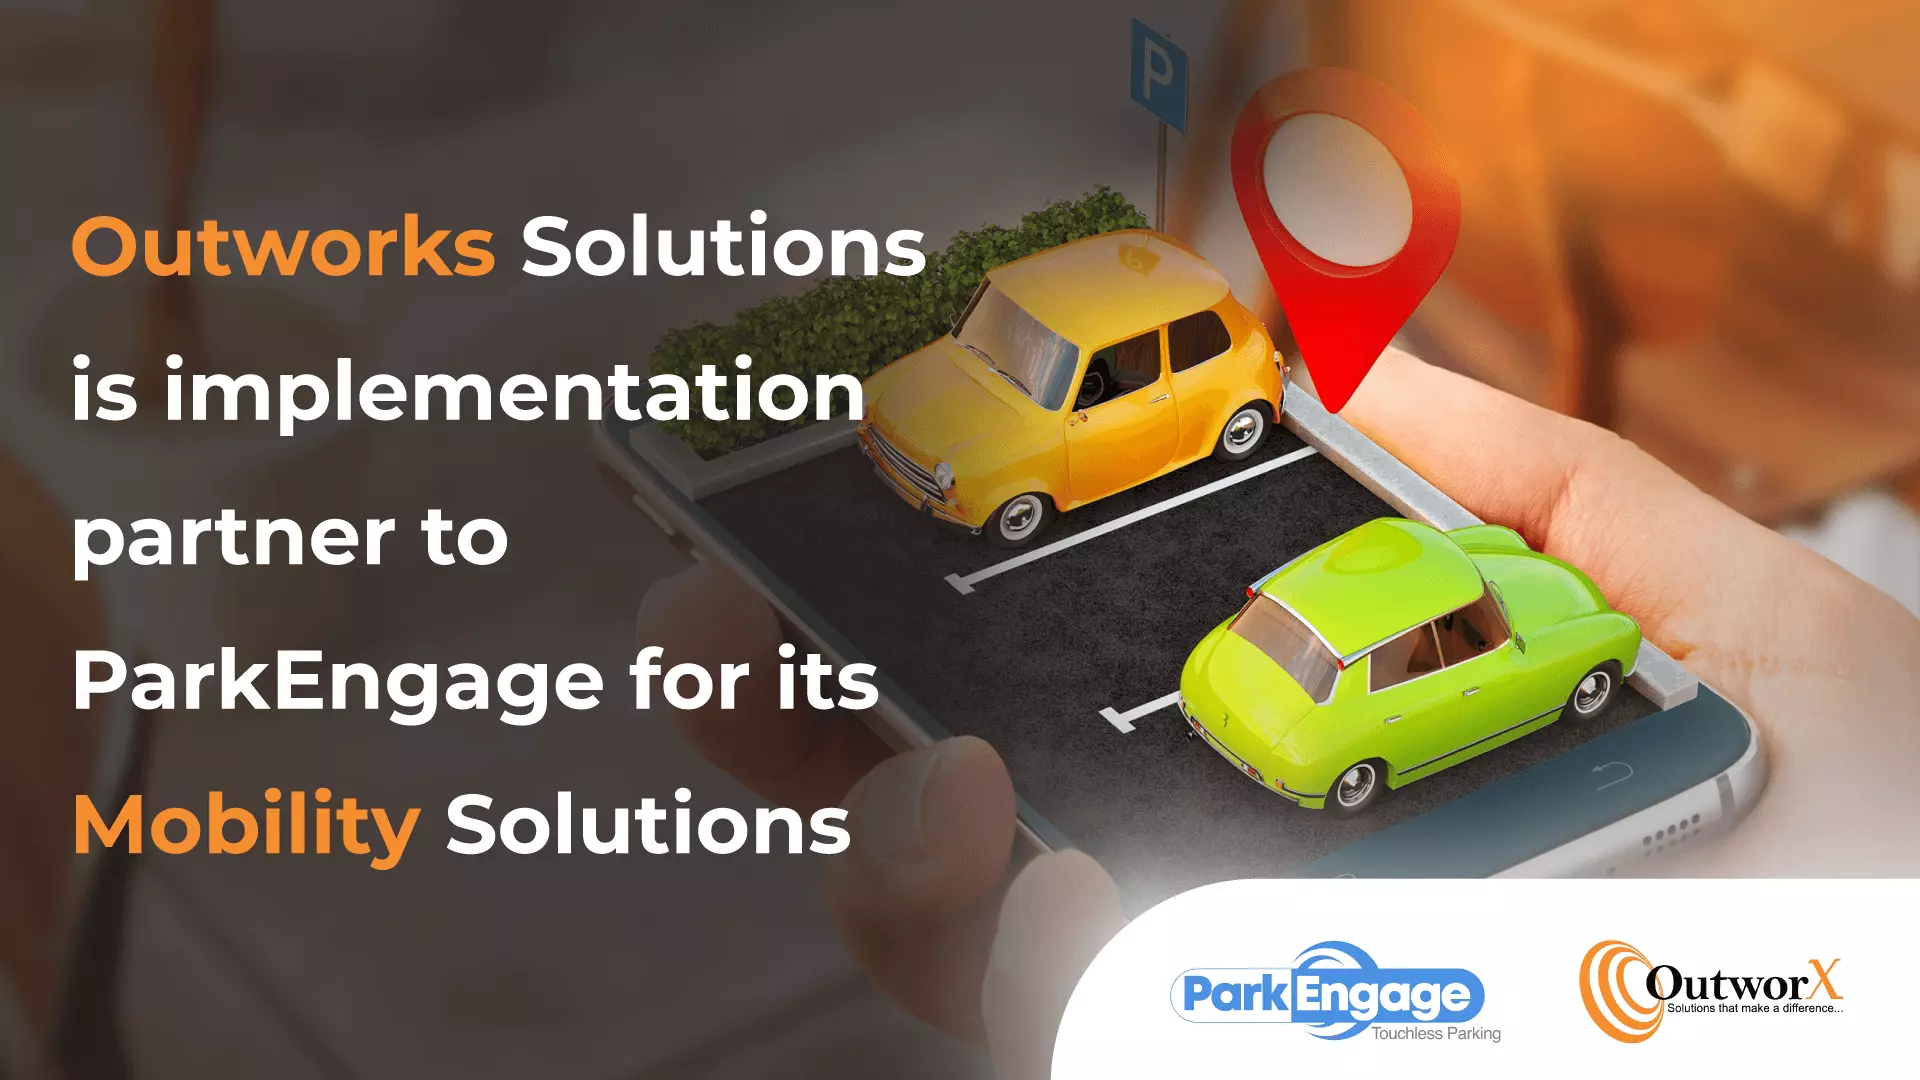 mobility solutions in india, parkengage parking solutions, touchless parking solutions, monthly parking solutions, digital parking solutions, smart parking solutions, alpr parking solutions, digitalize parking infrastructure